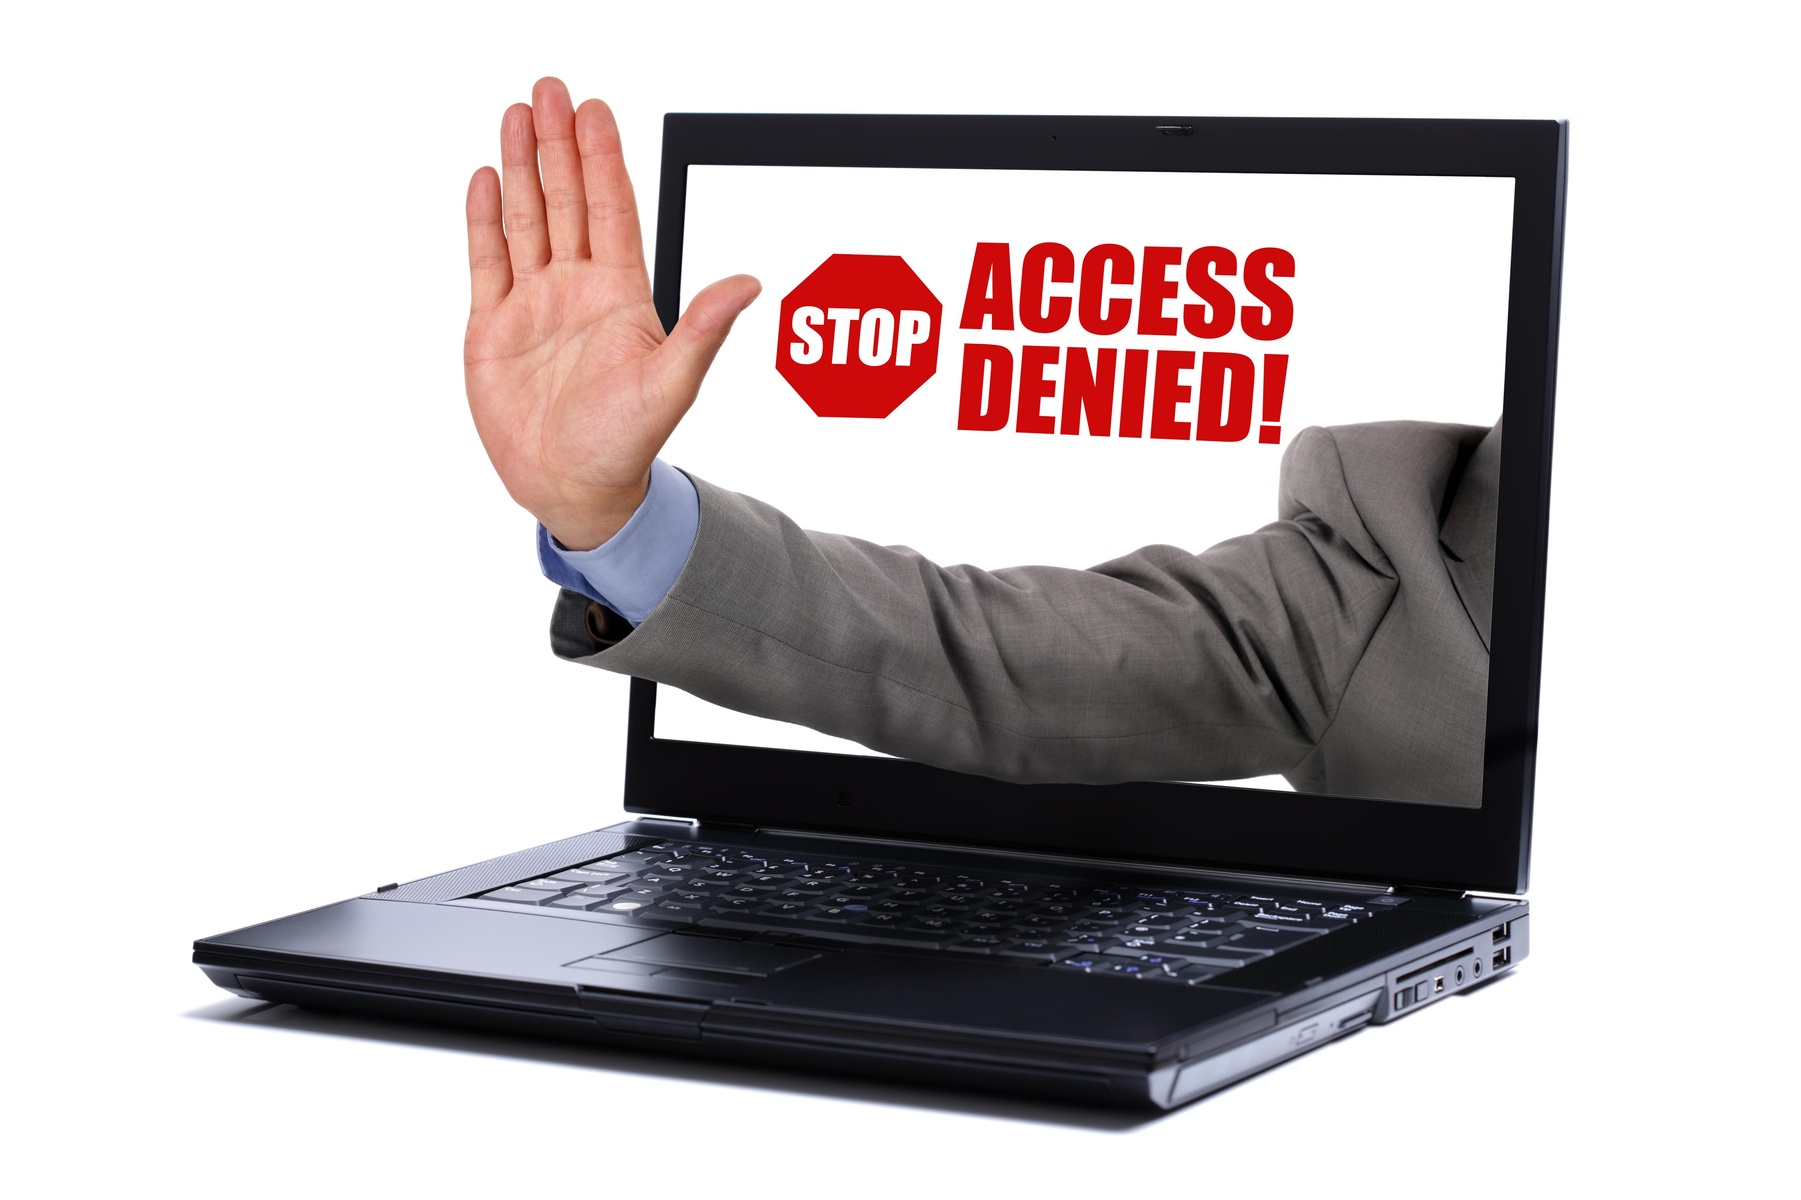 How To Fix Access Denied On Google Chrome